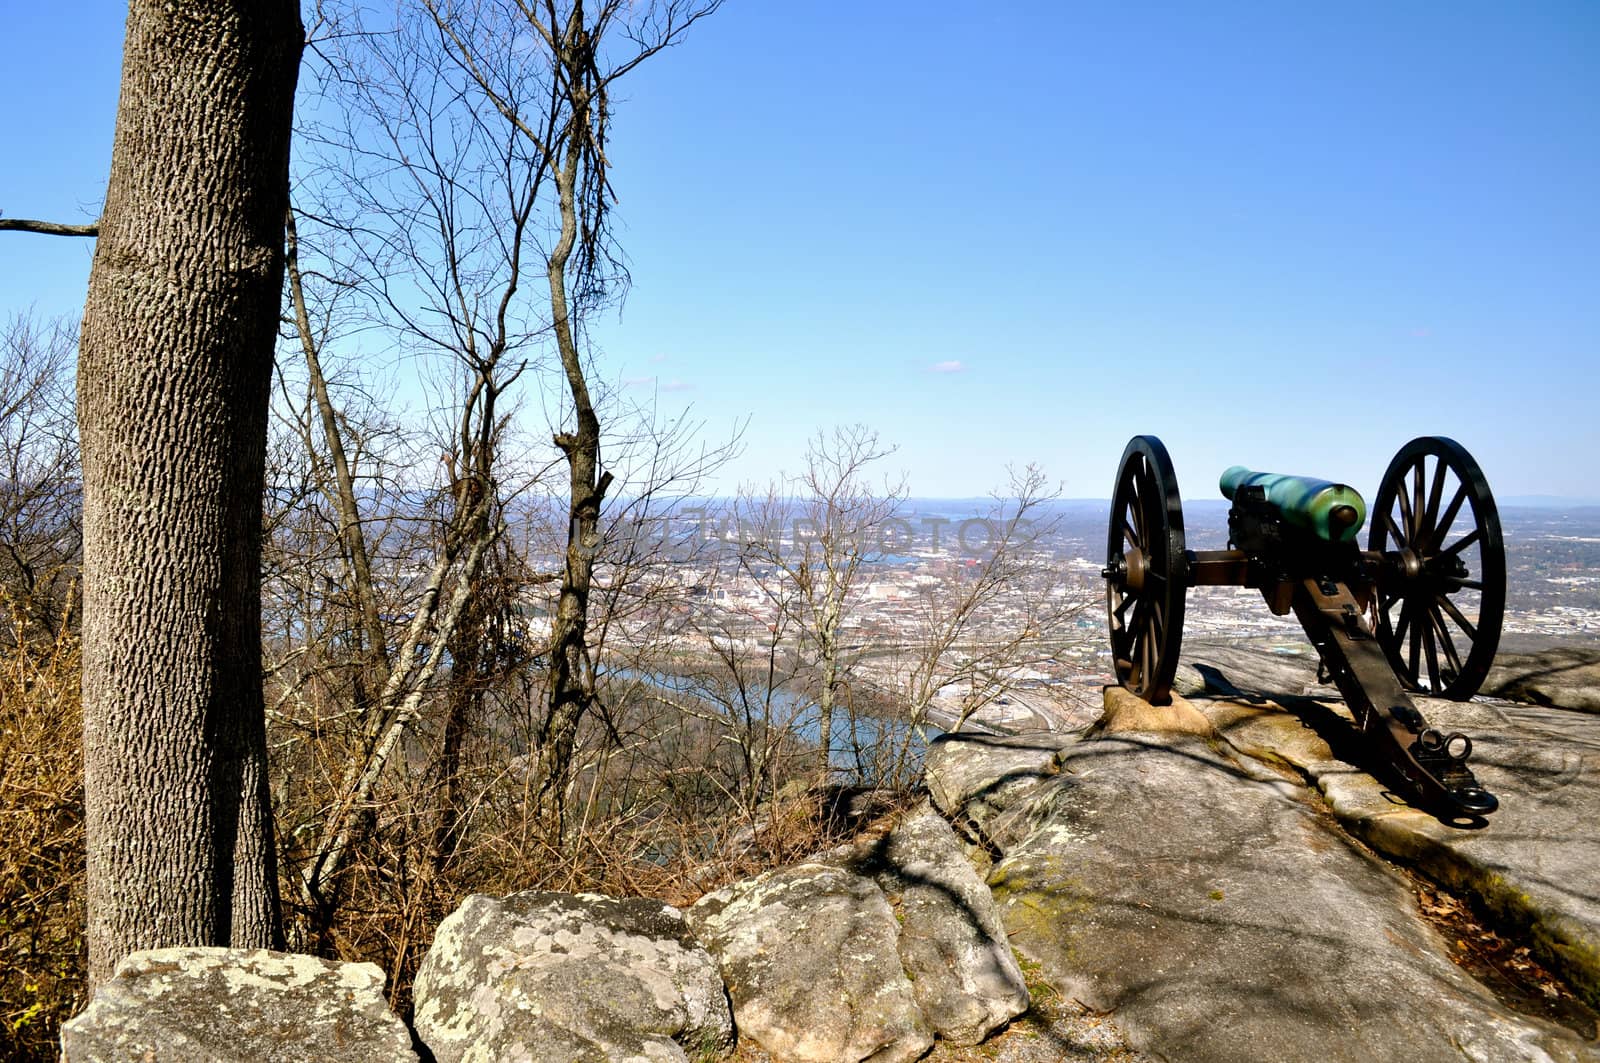 A Cannon over Chattanooga
